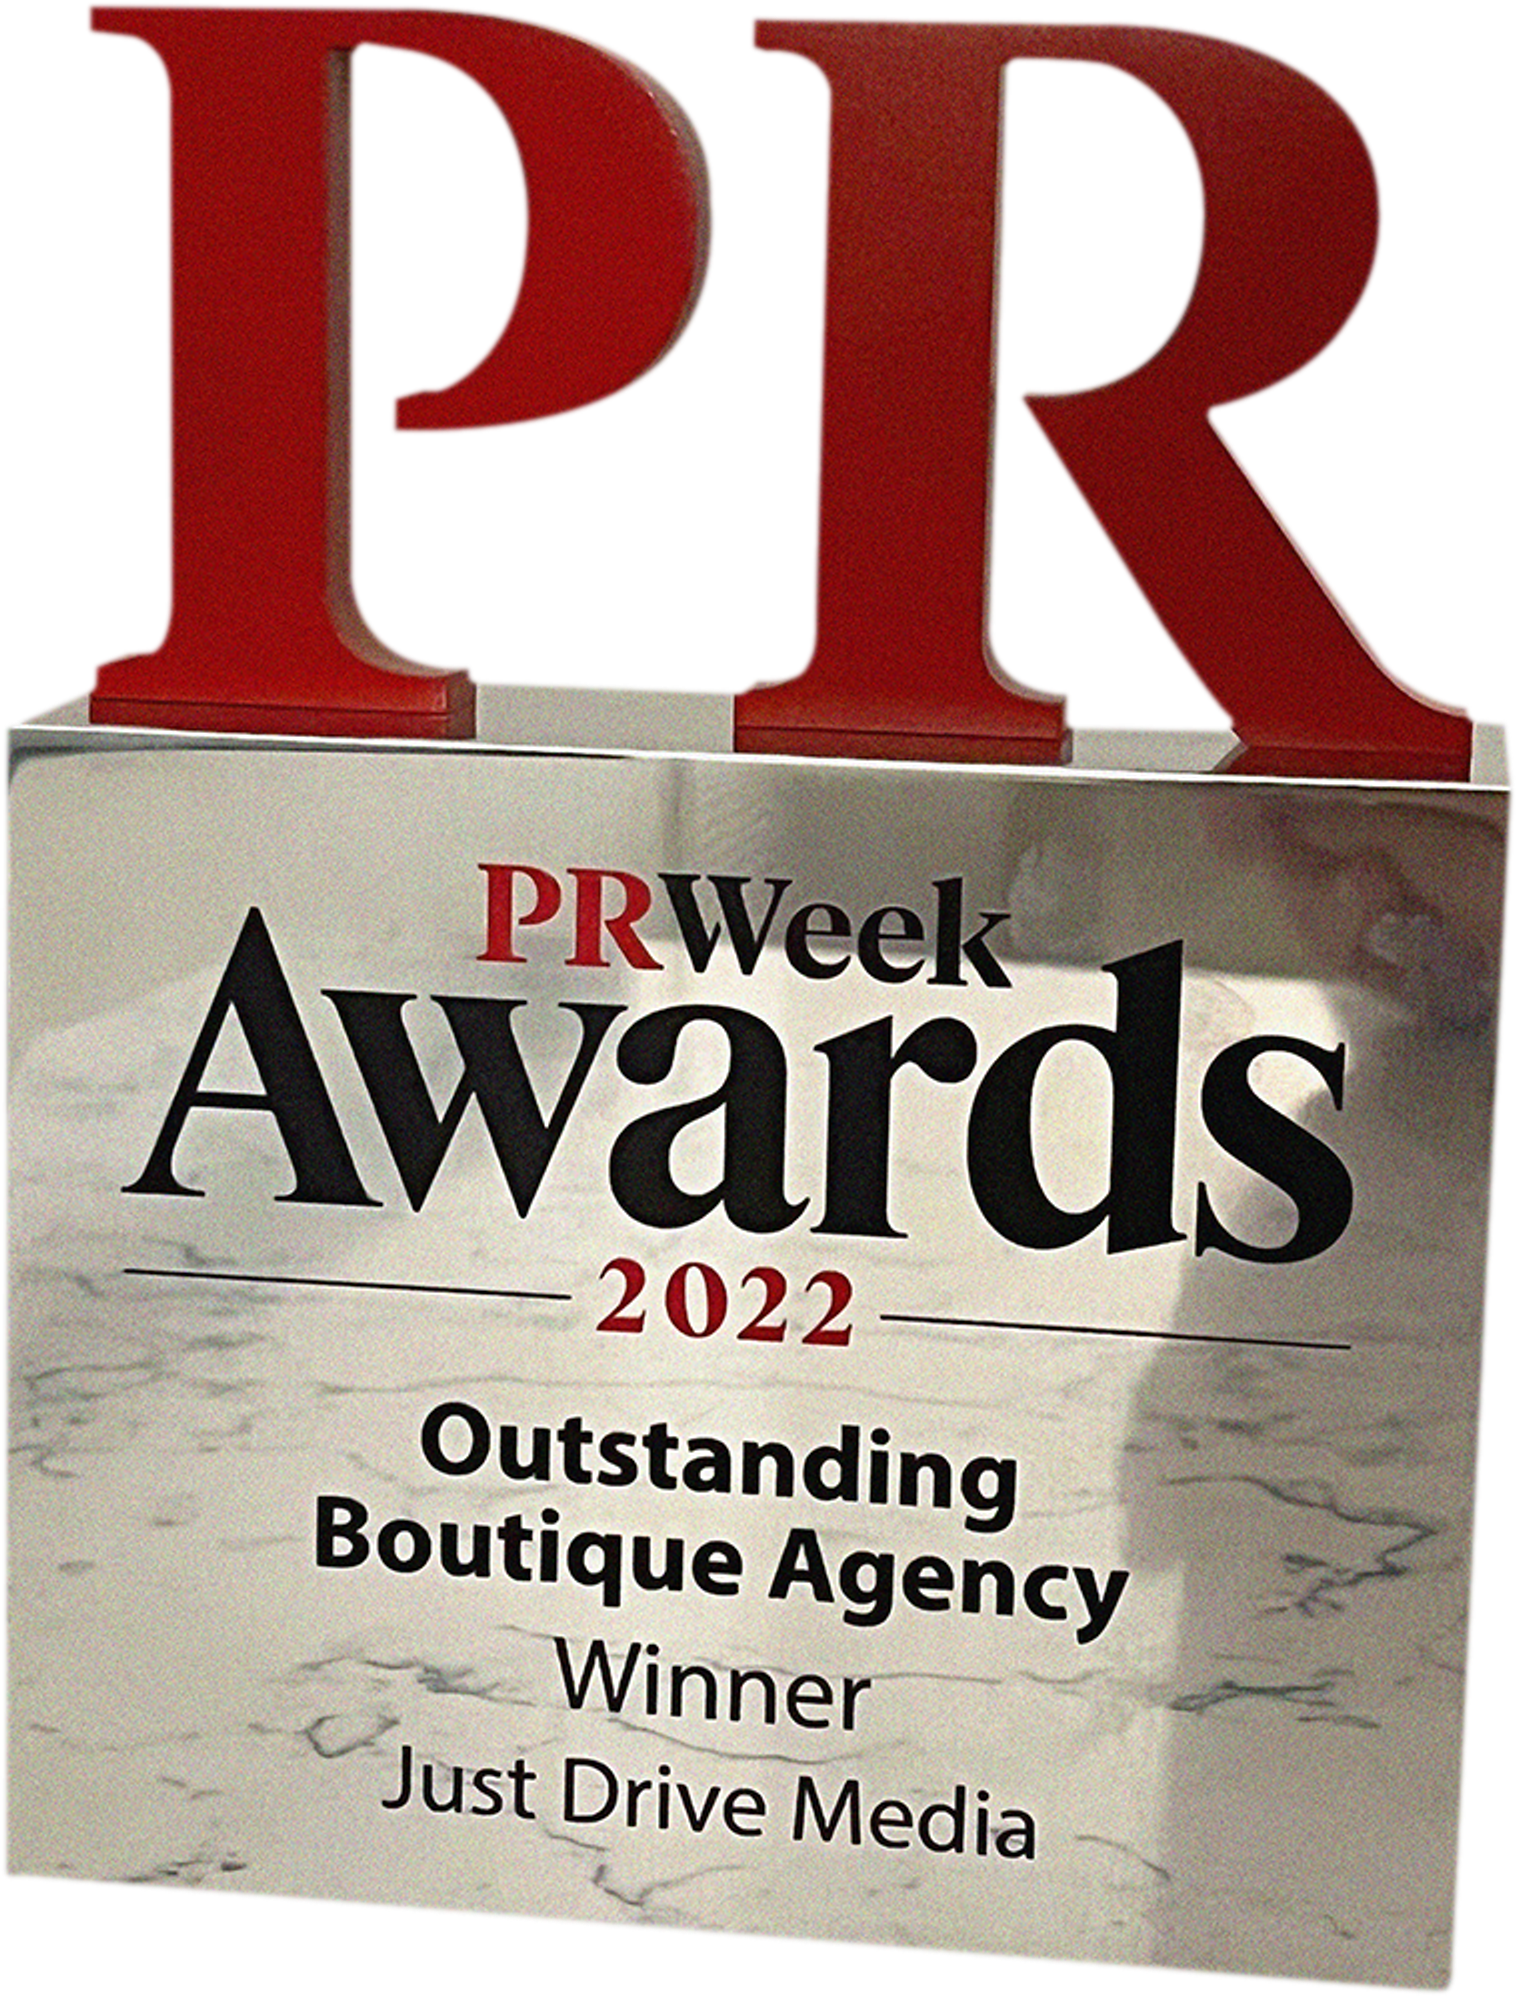 An award trophy for "PRWeek Awards 2022" recognizing the "Outstanding Boutique Agency," won by "Just Drive Media."